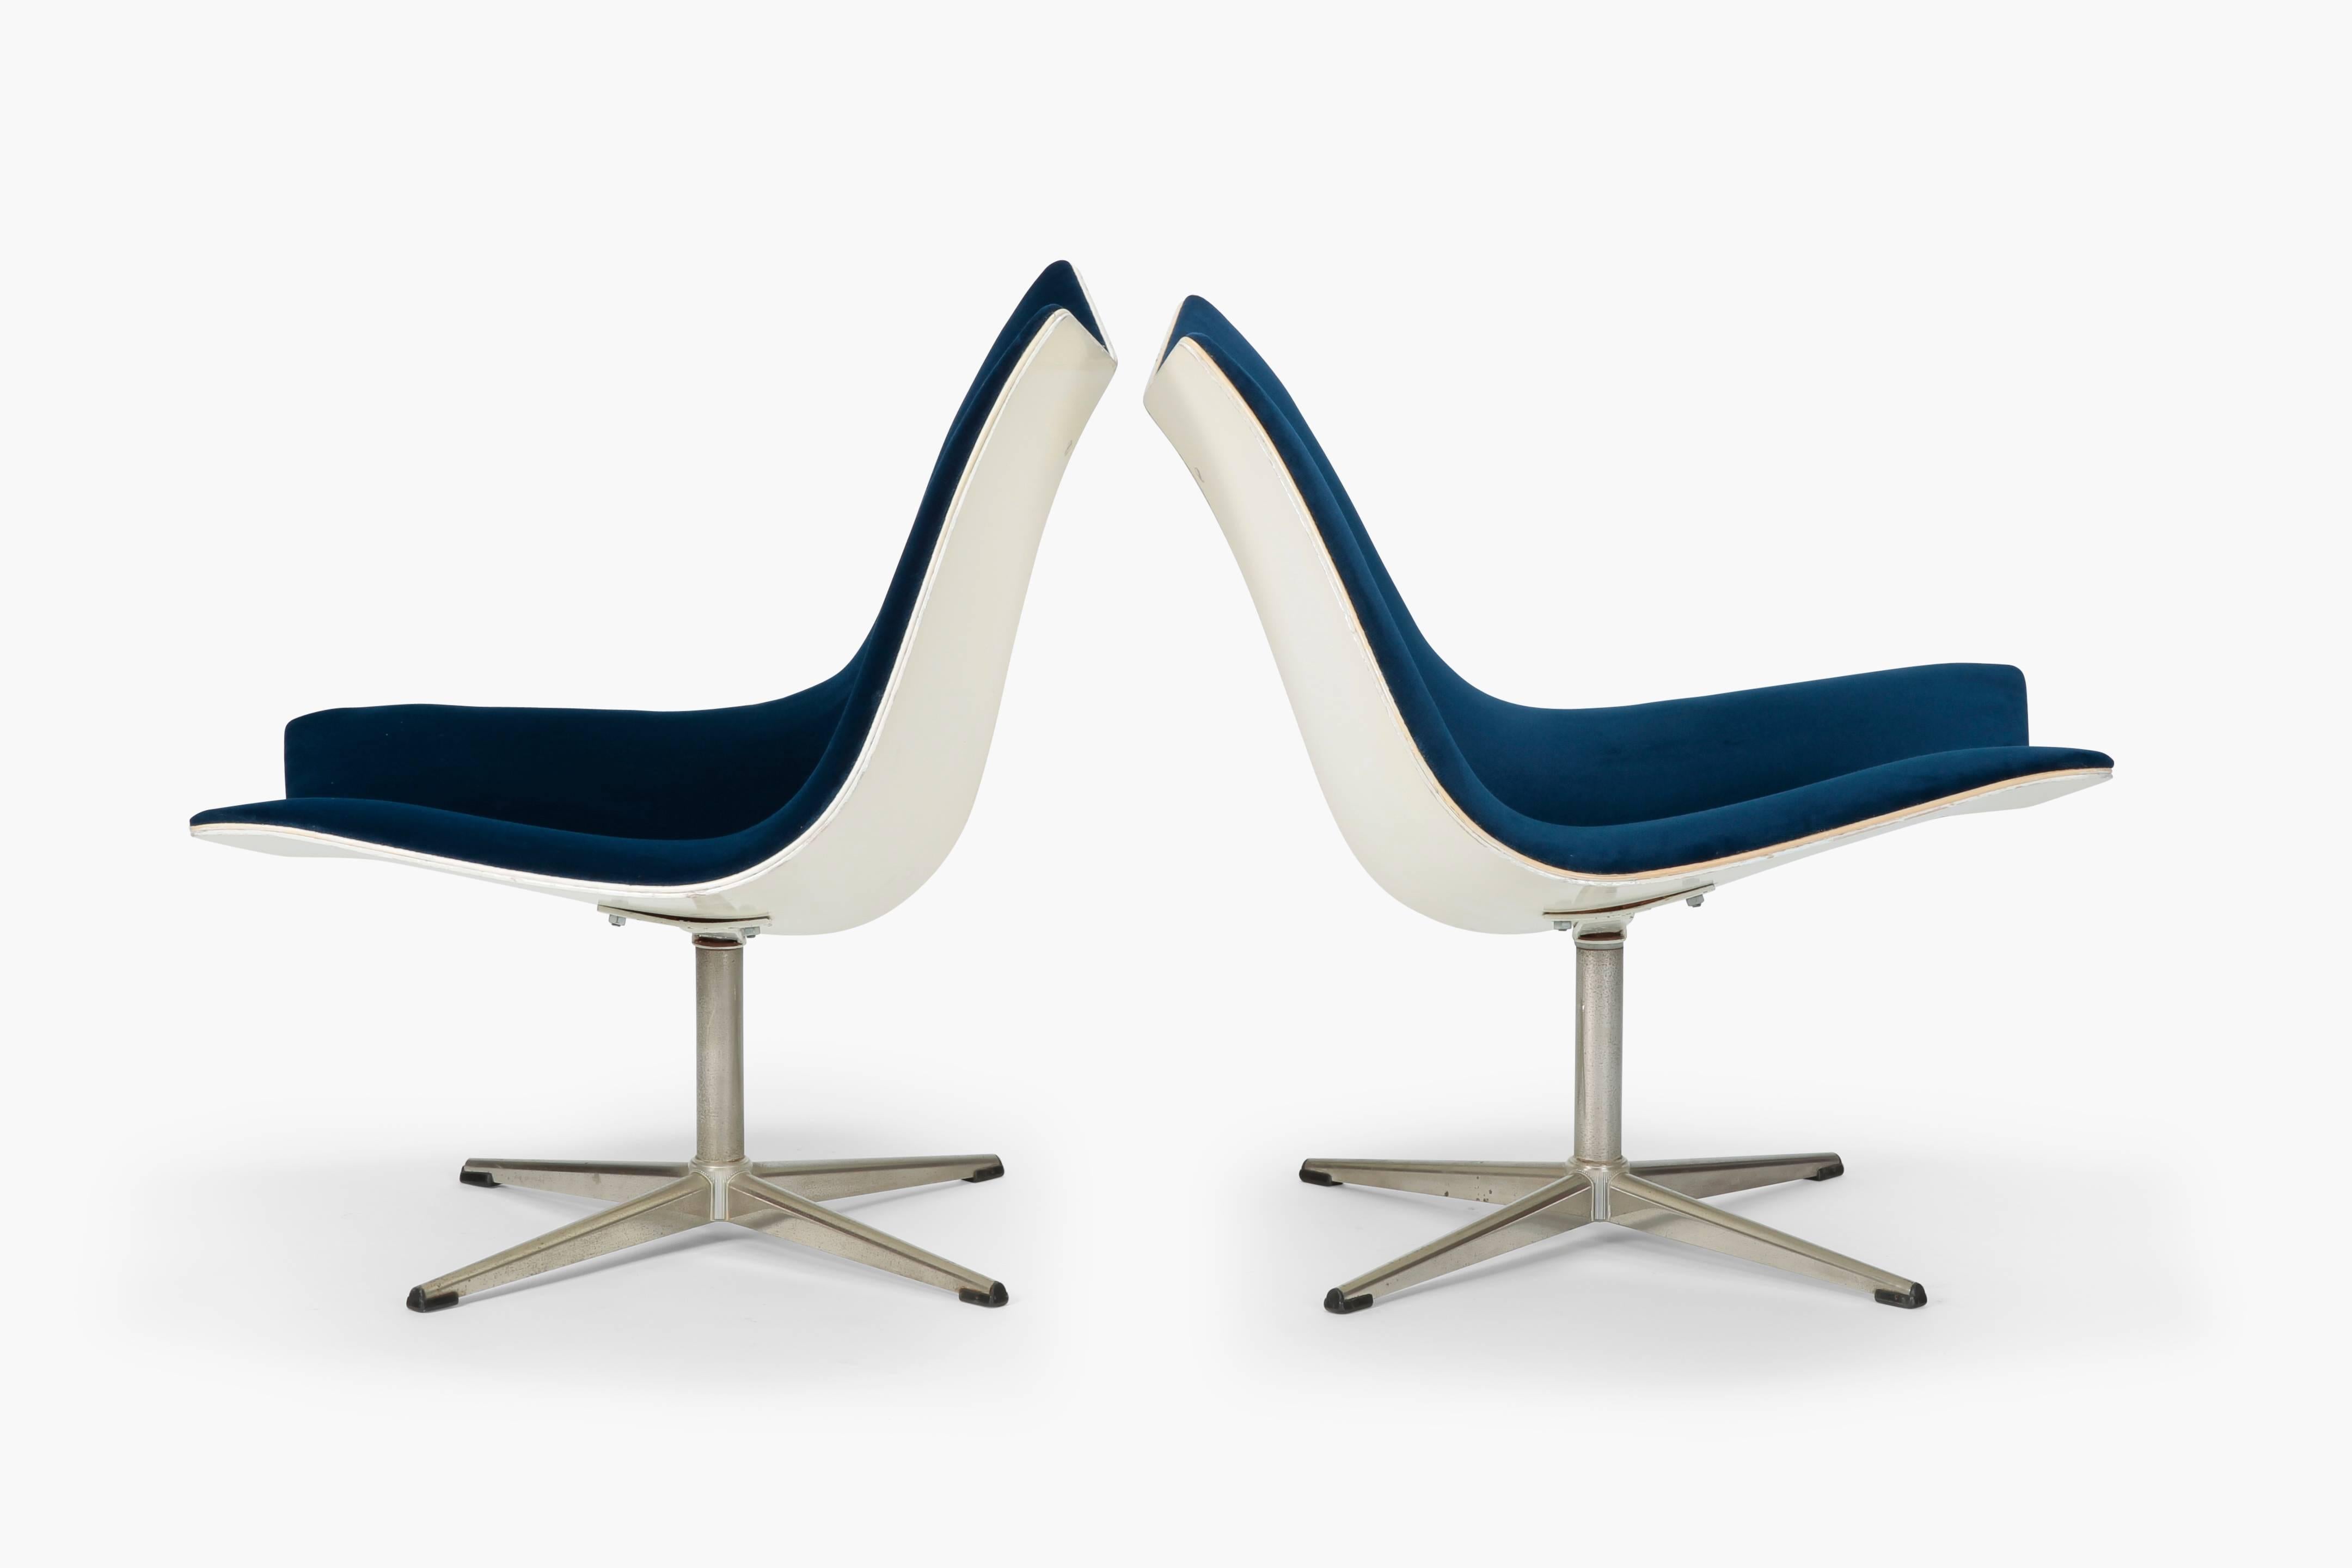 Pair of Montreal Expo chairs manufactured in 1967 by Ebene LaSalle. This sculptural chair was designed for the 1967 Expo in Montreal hence the name Montreal Pavilion chair with painted molded plywood frame.